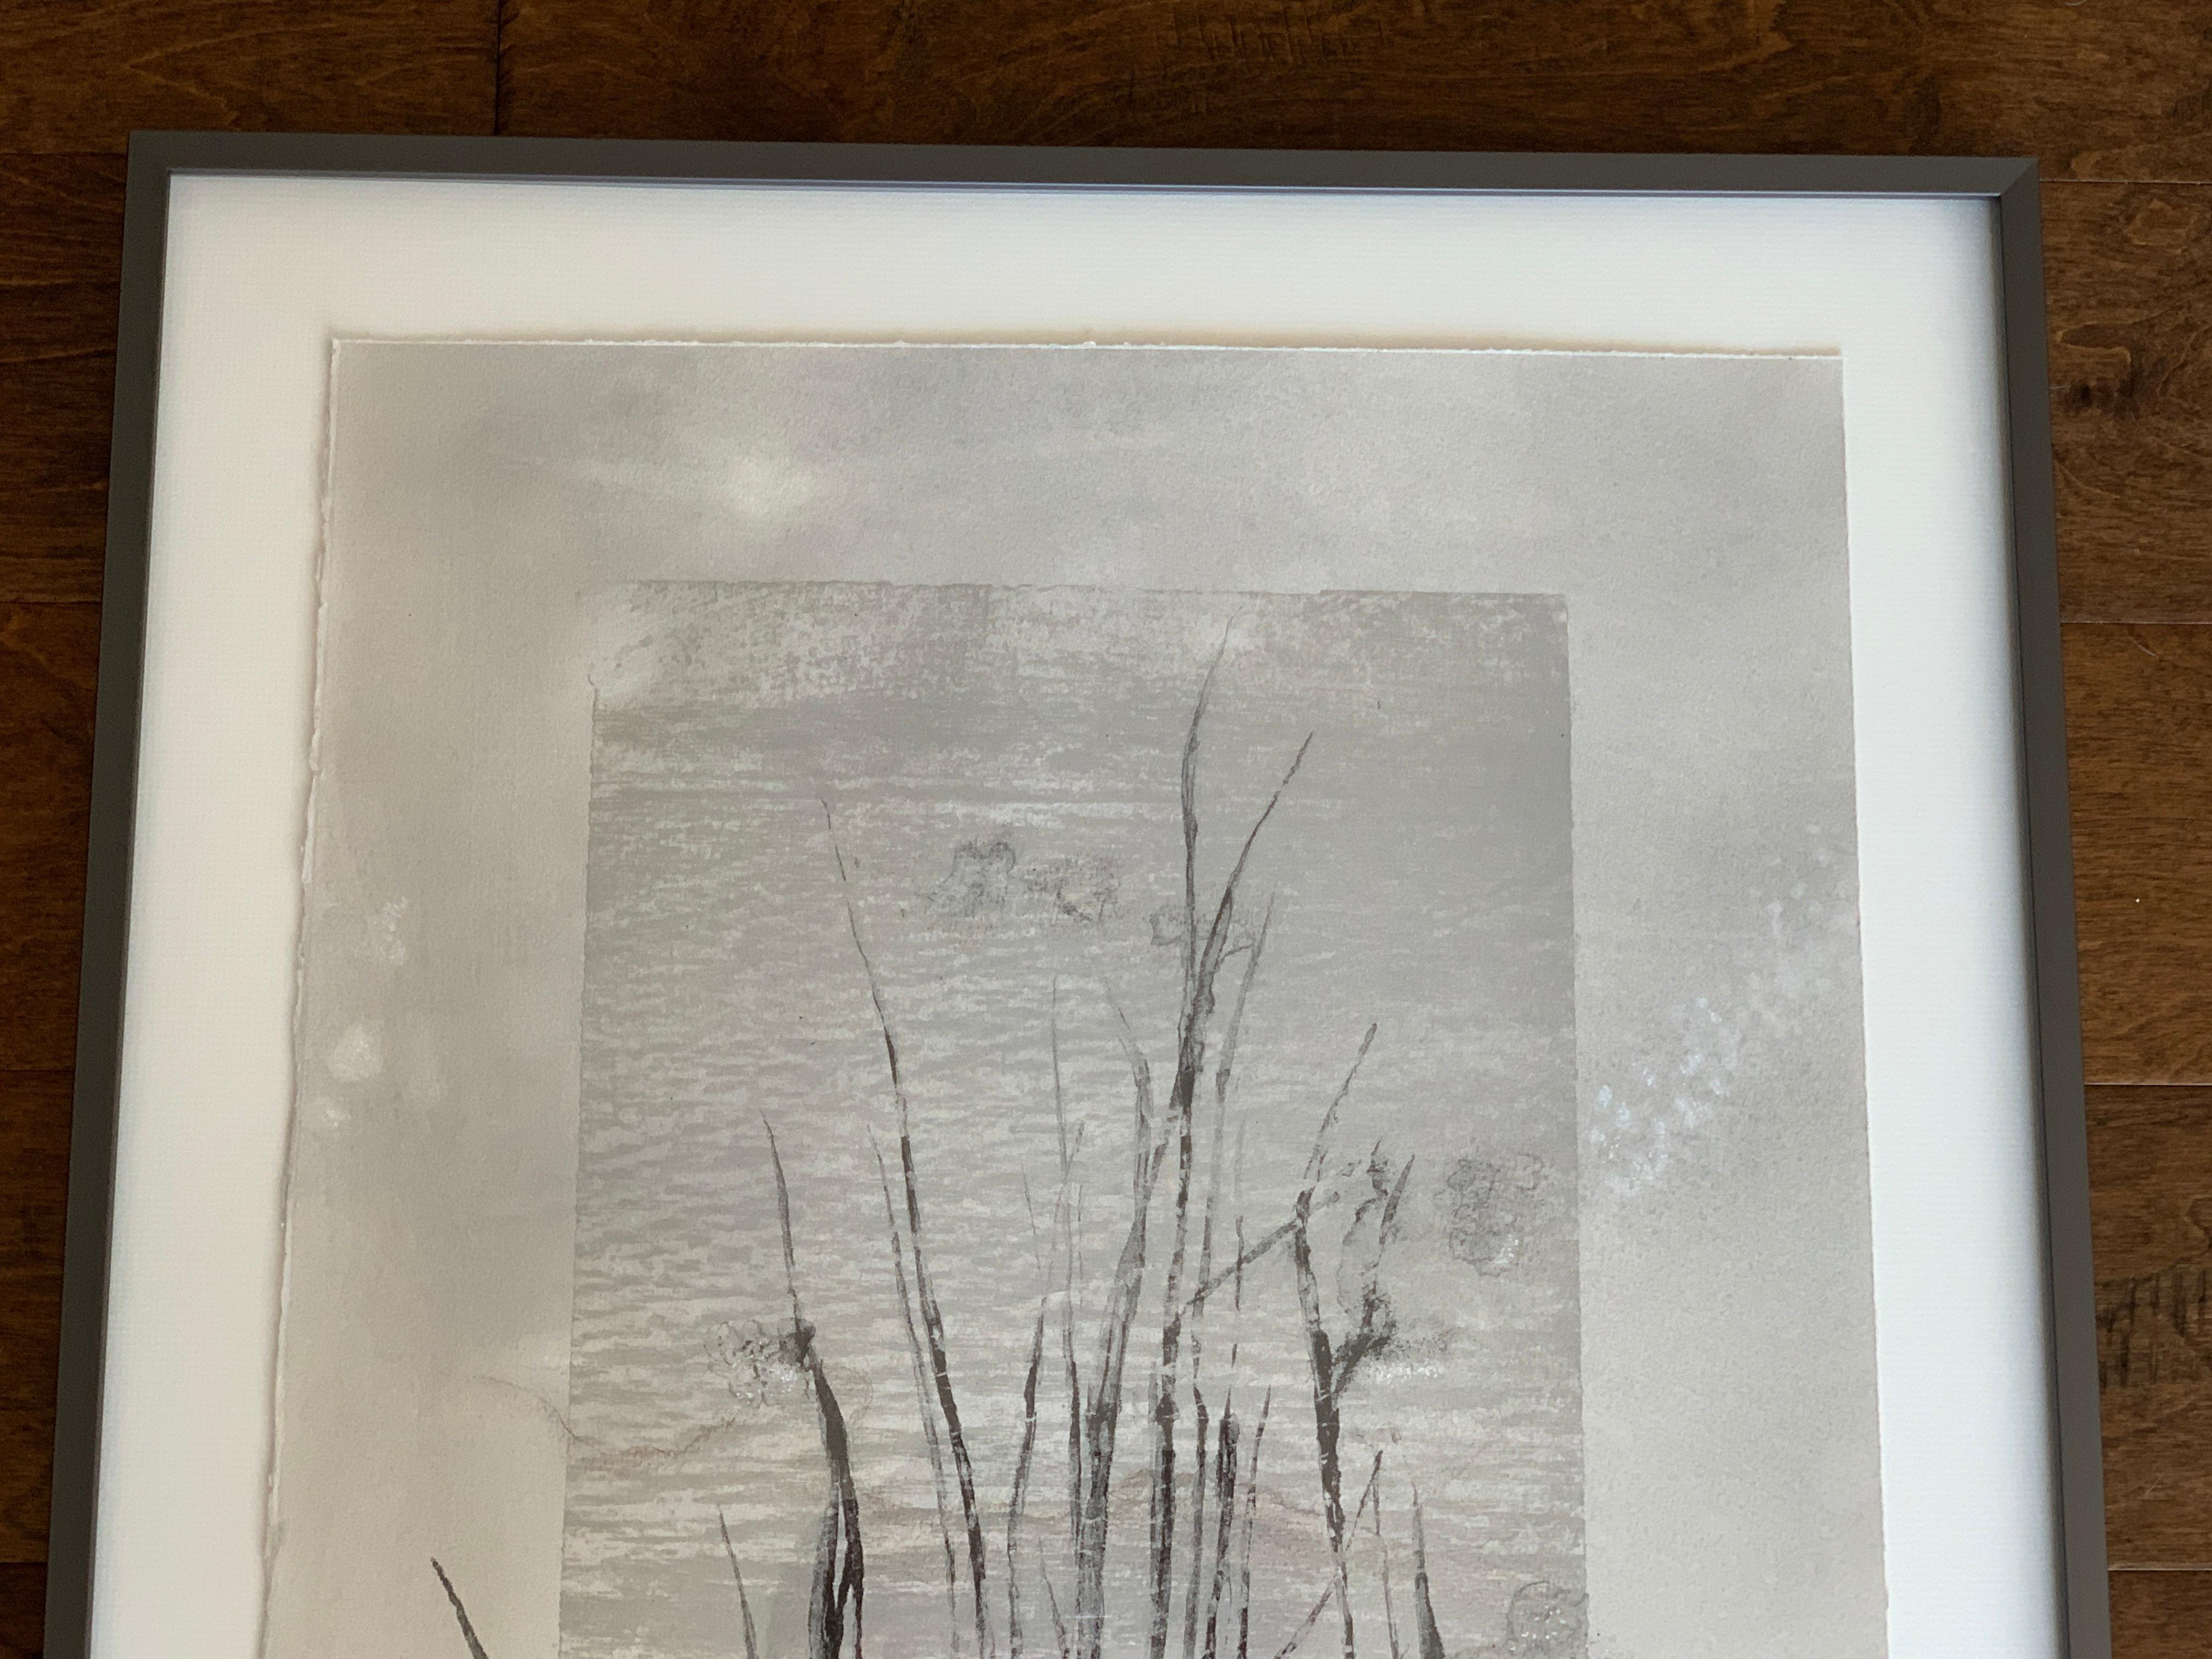 'Bog Grass' in grey and teal, Laurie Carnohan, 2019.
Edition: 1/4
Photolithograph with mixed-media.
16in W x 28.5in H (unframed)
20.25in W x 32.75in H x 1.25